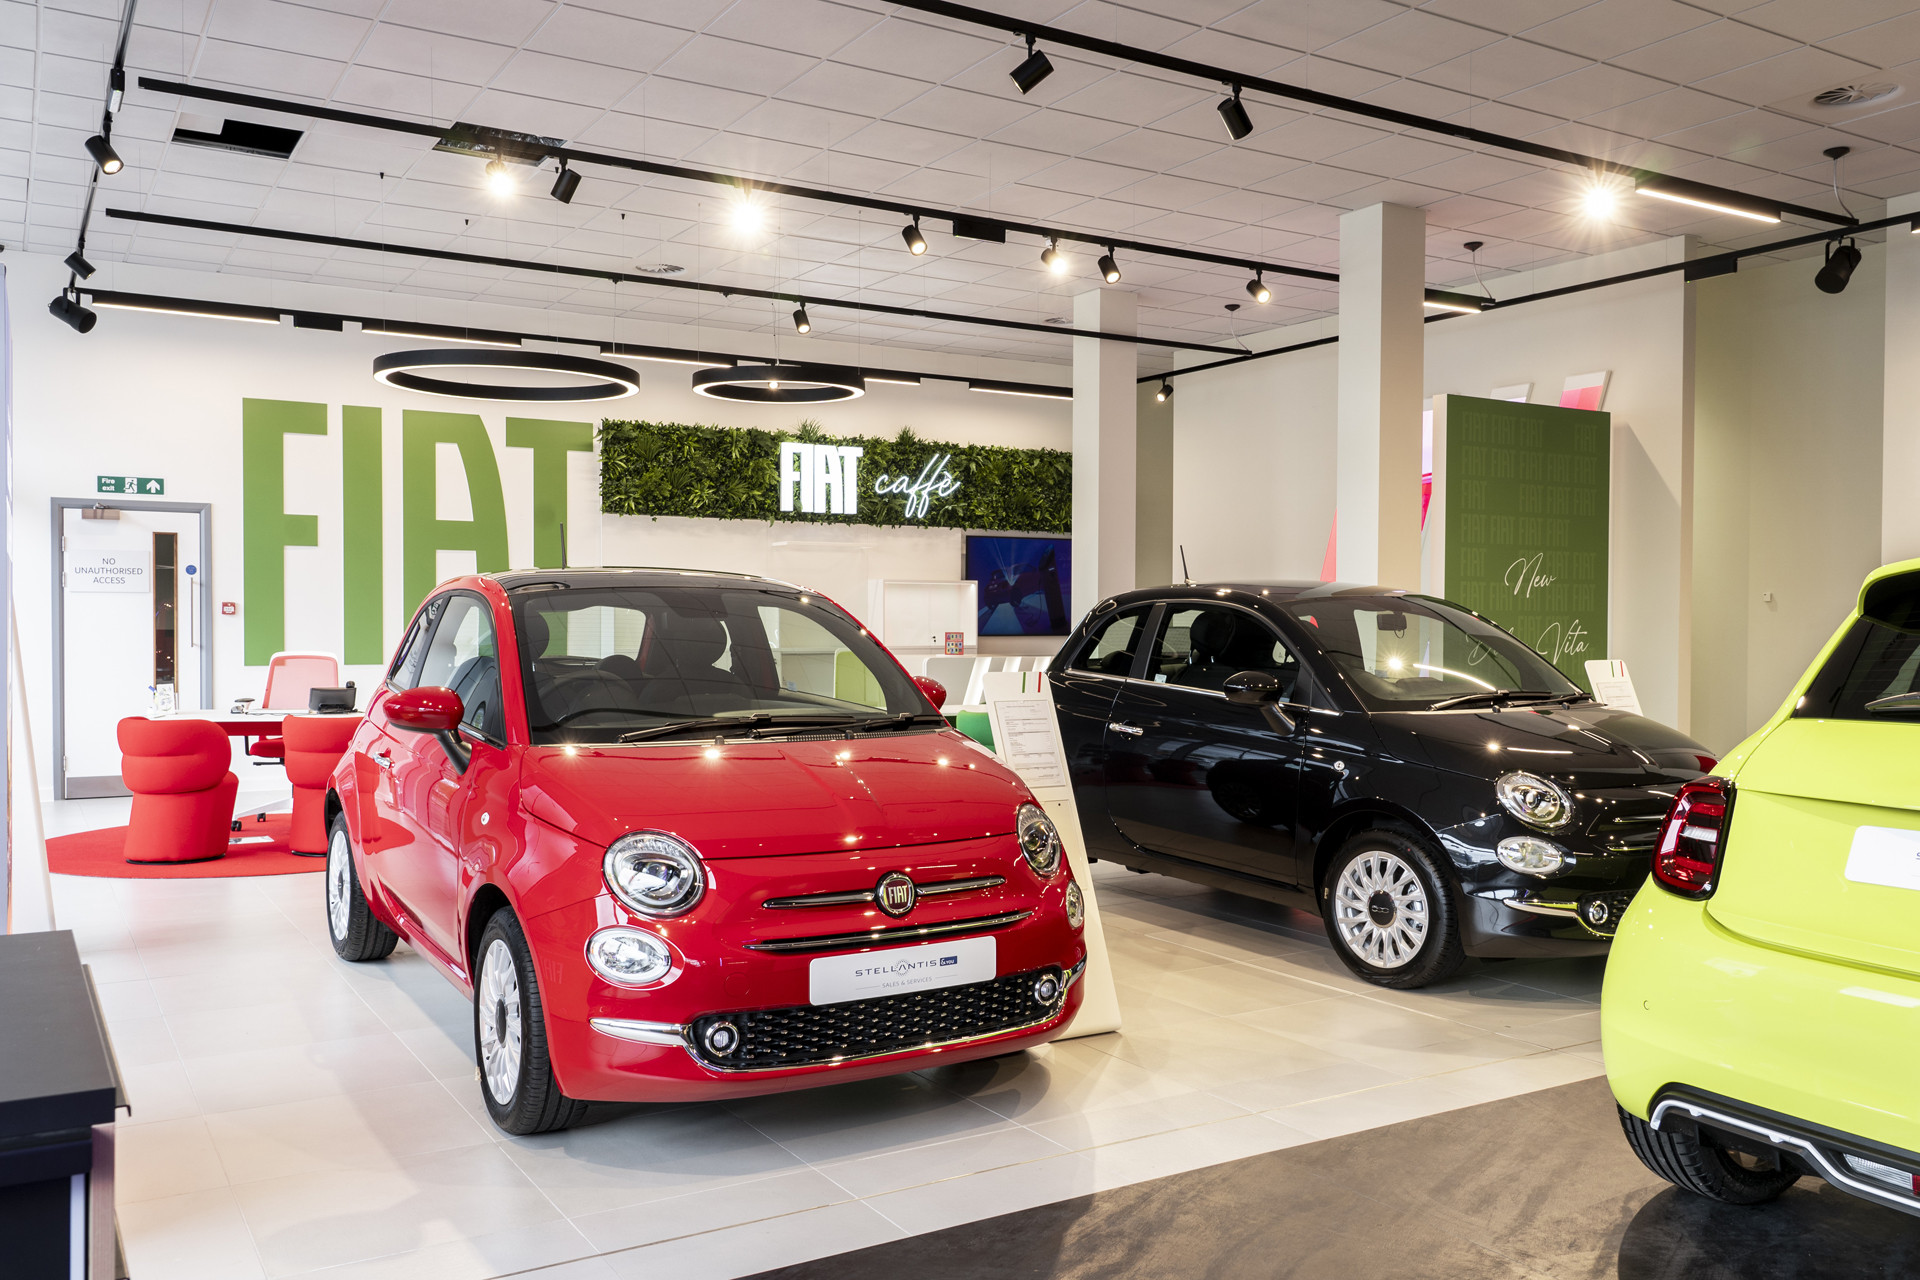 La Dolce Vita comes to West London with New FIAT and Abarth Showroom